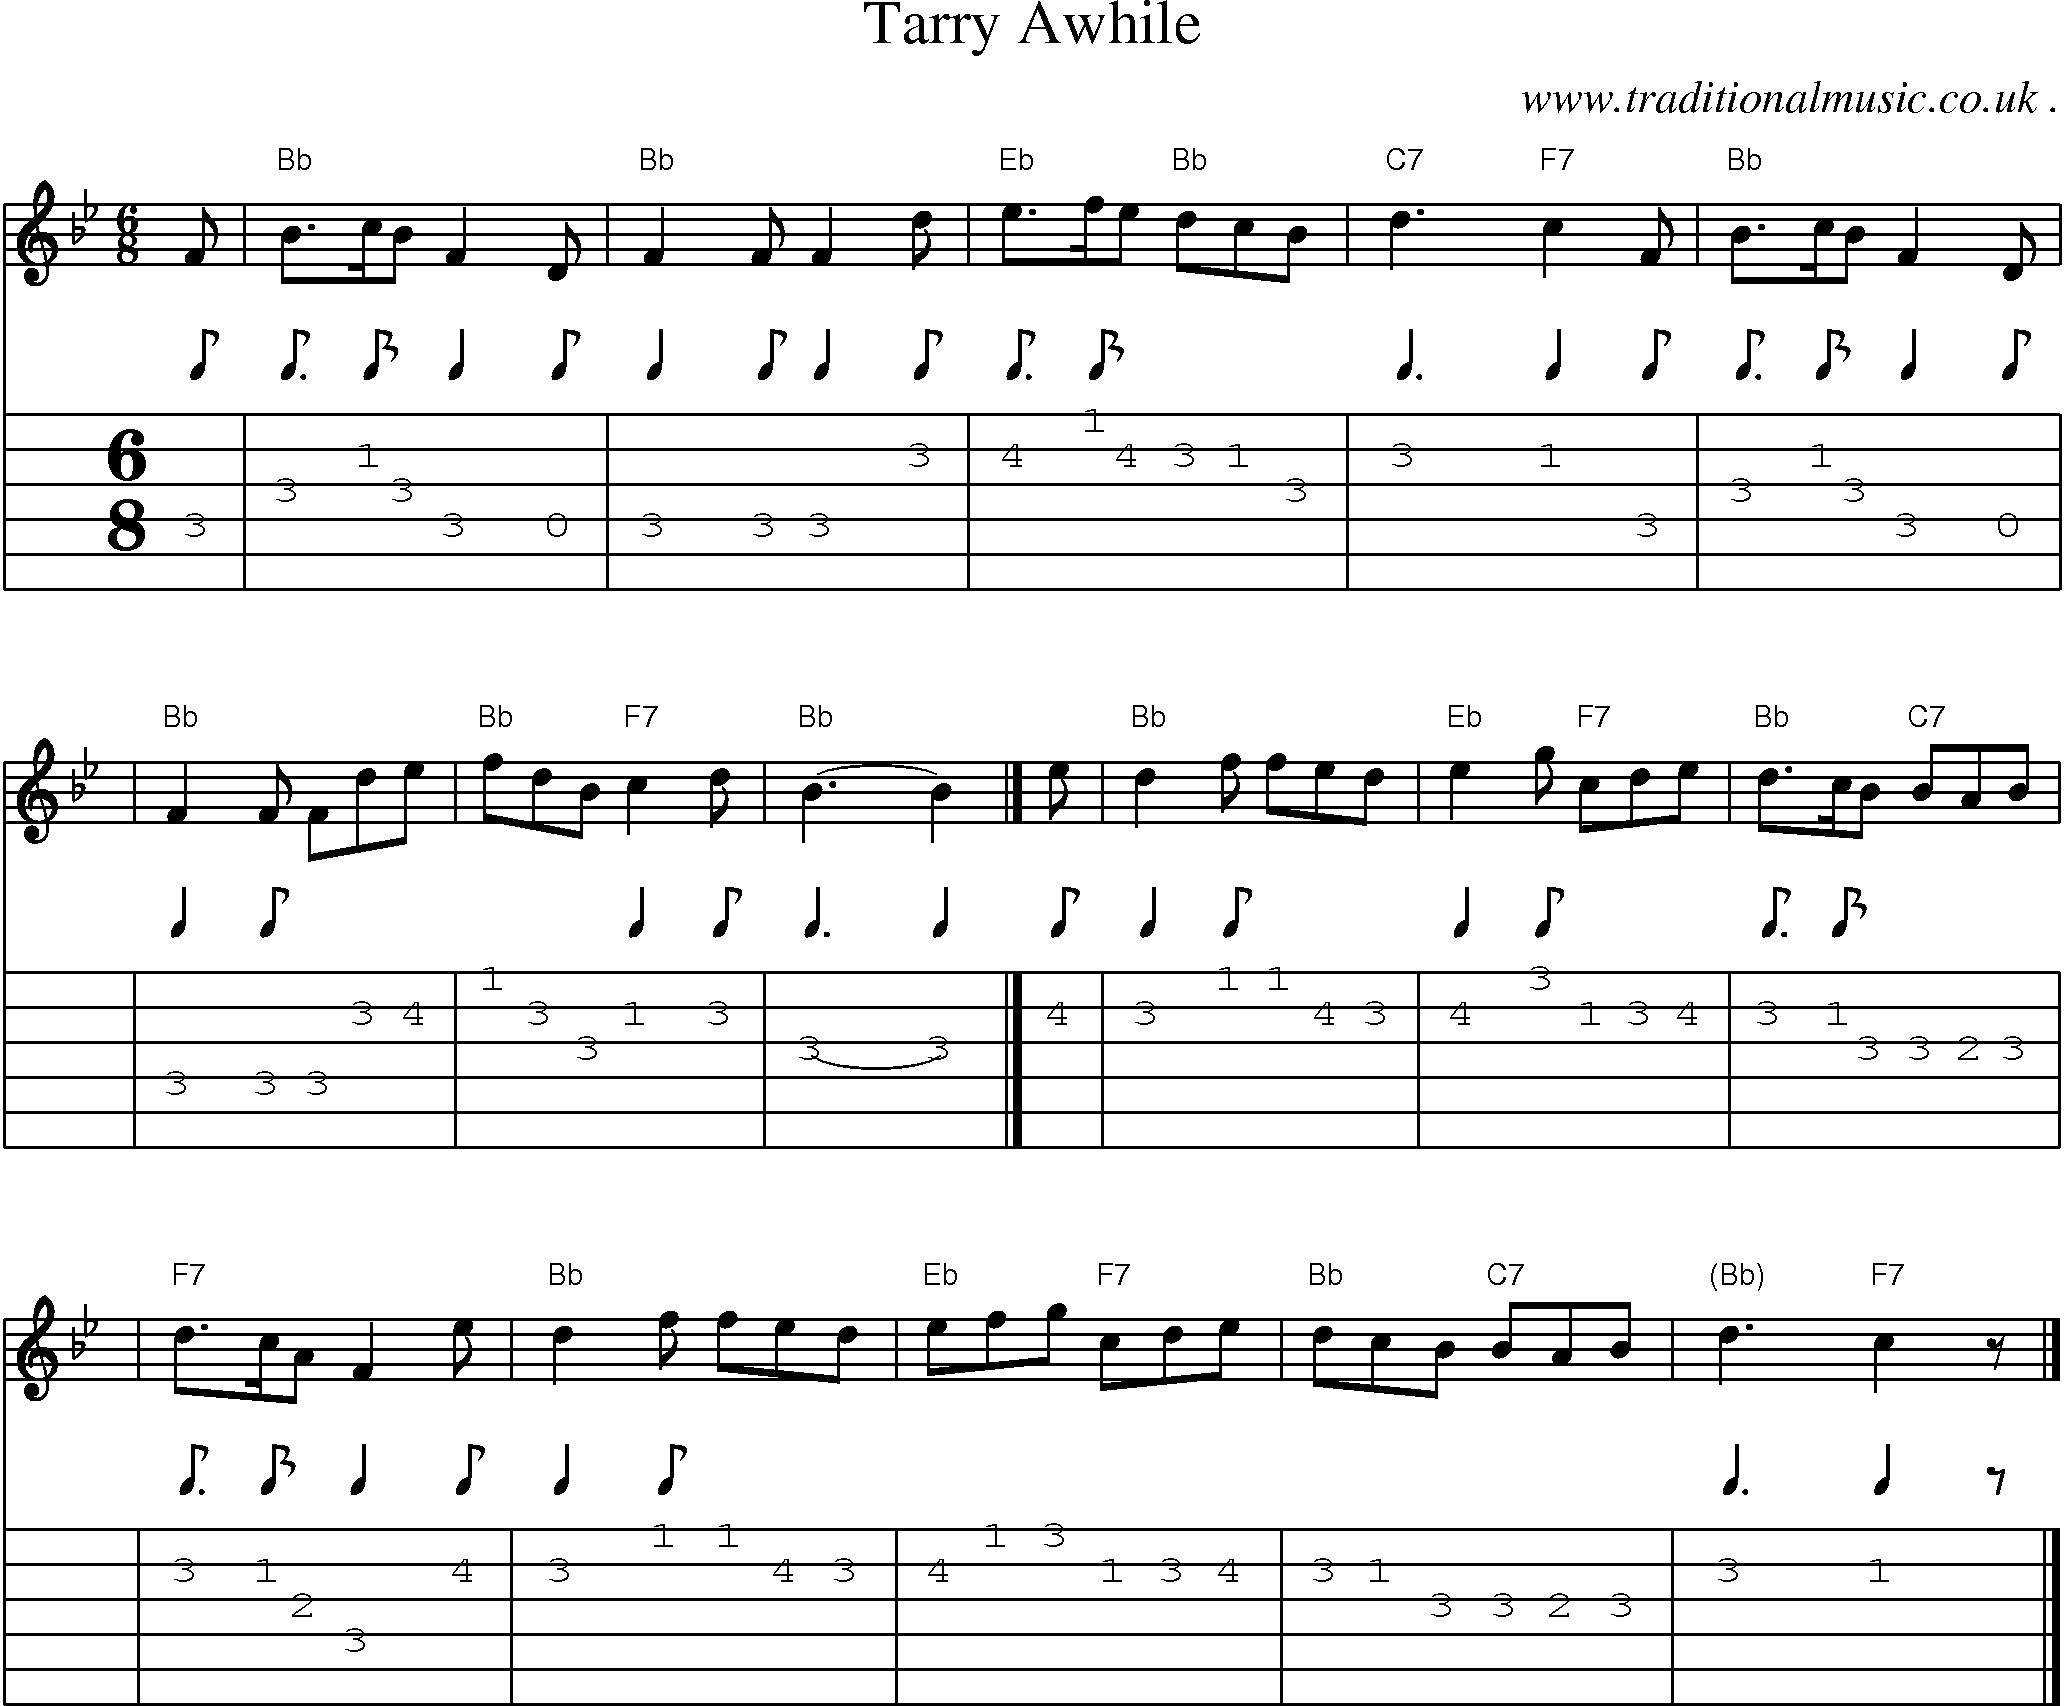 Sheet-music  score, Chords and Guitar Tabs for Tarry Awhile